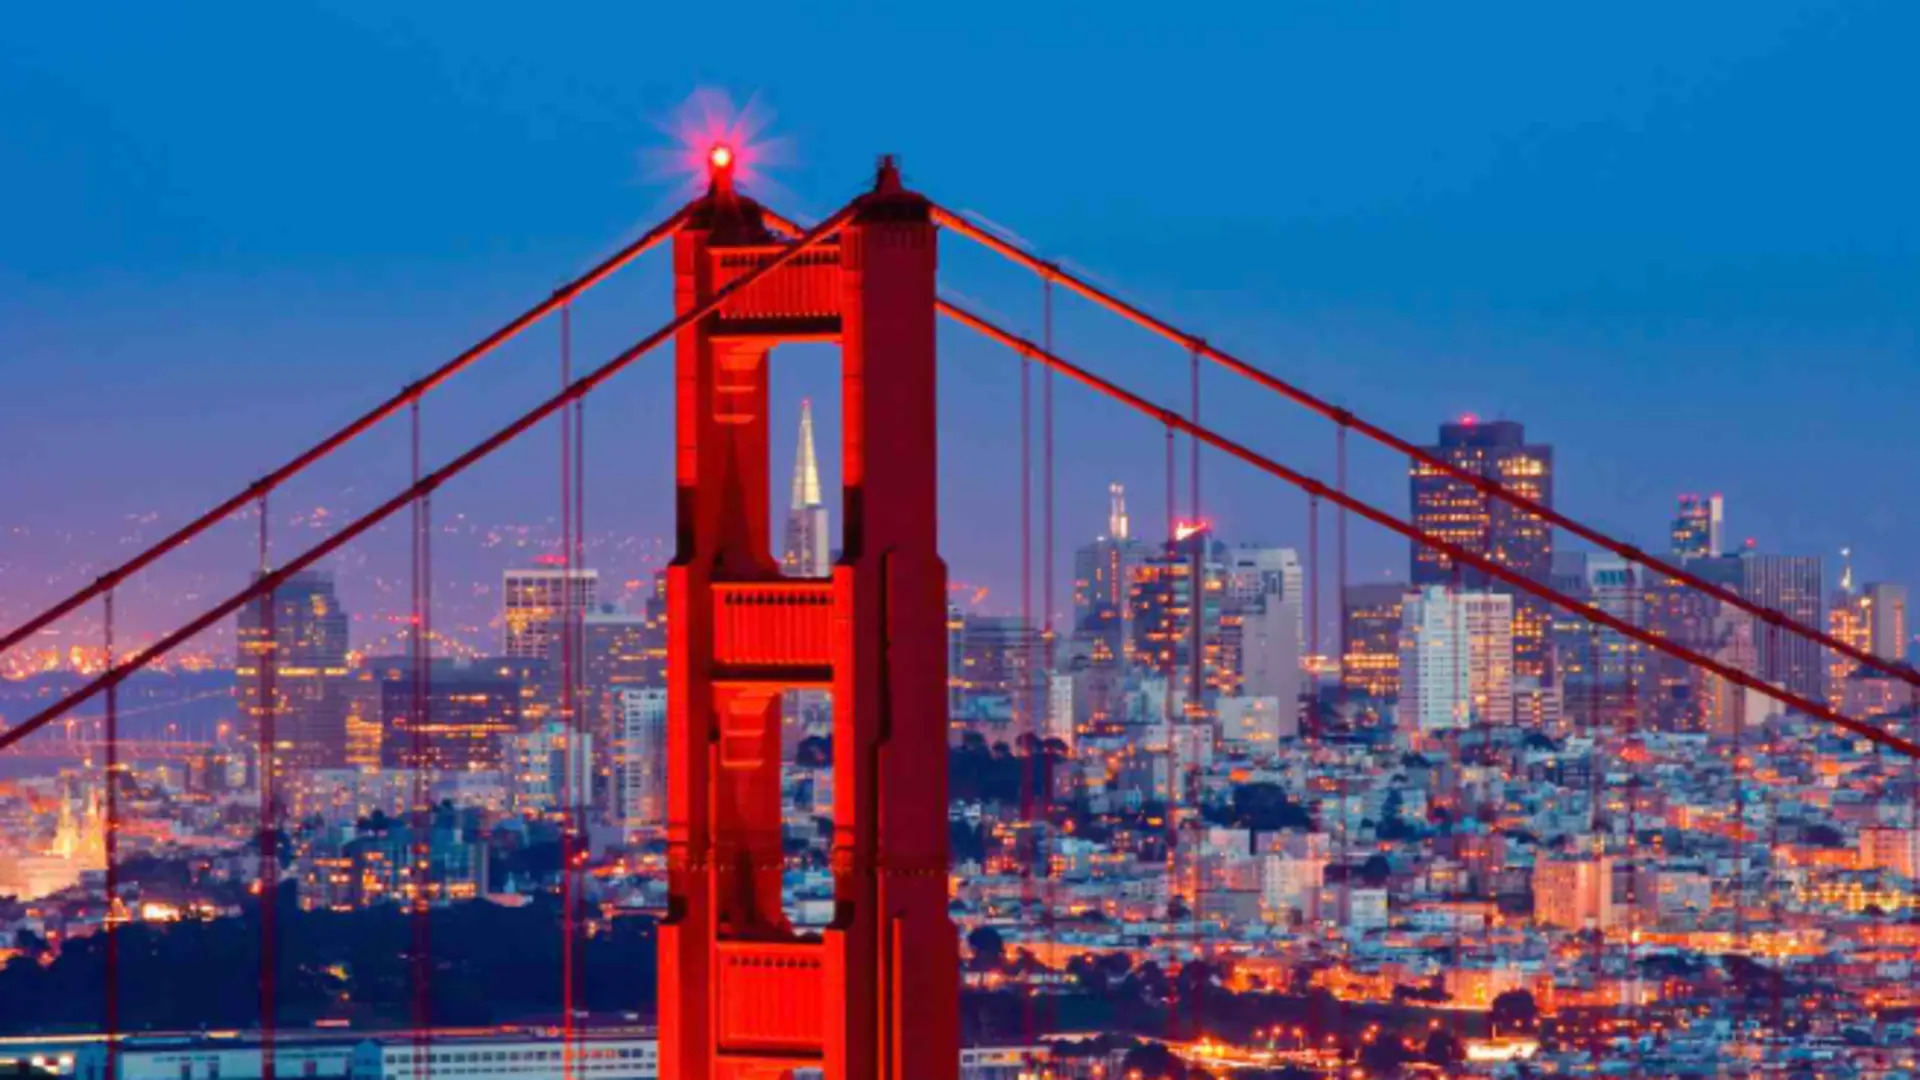 San Francisco Hotels With Great Views of the Golden Gate Bridge